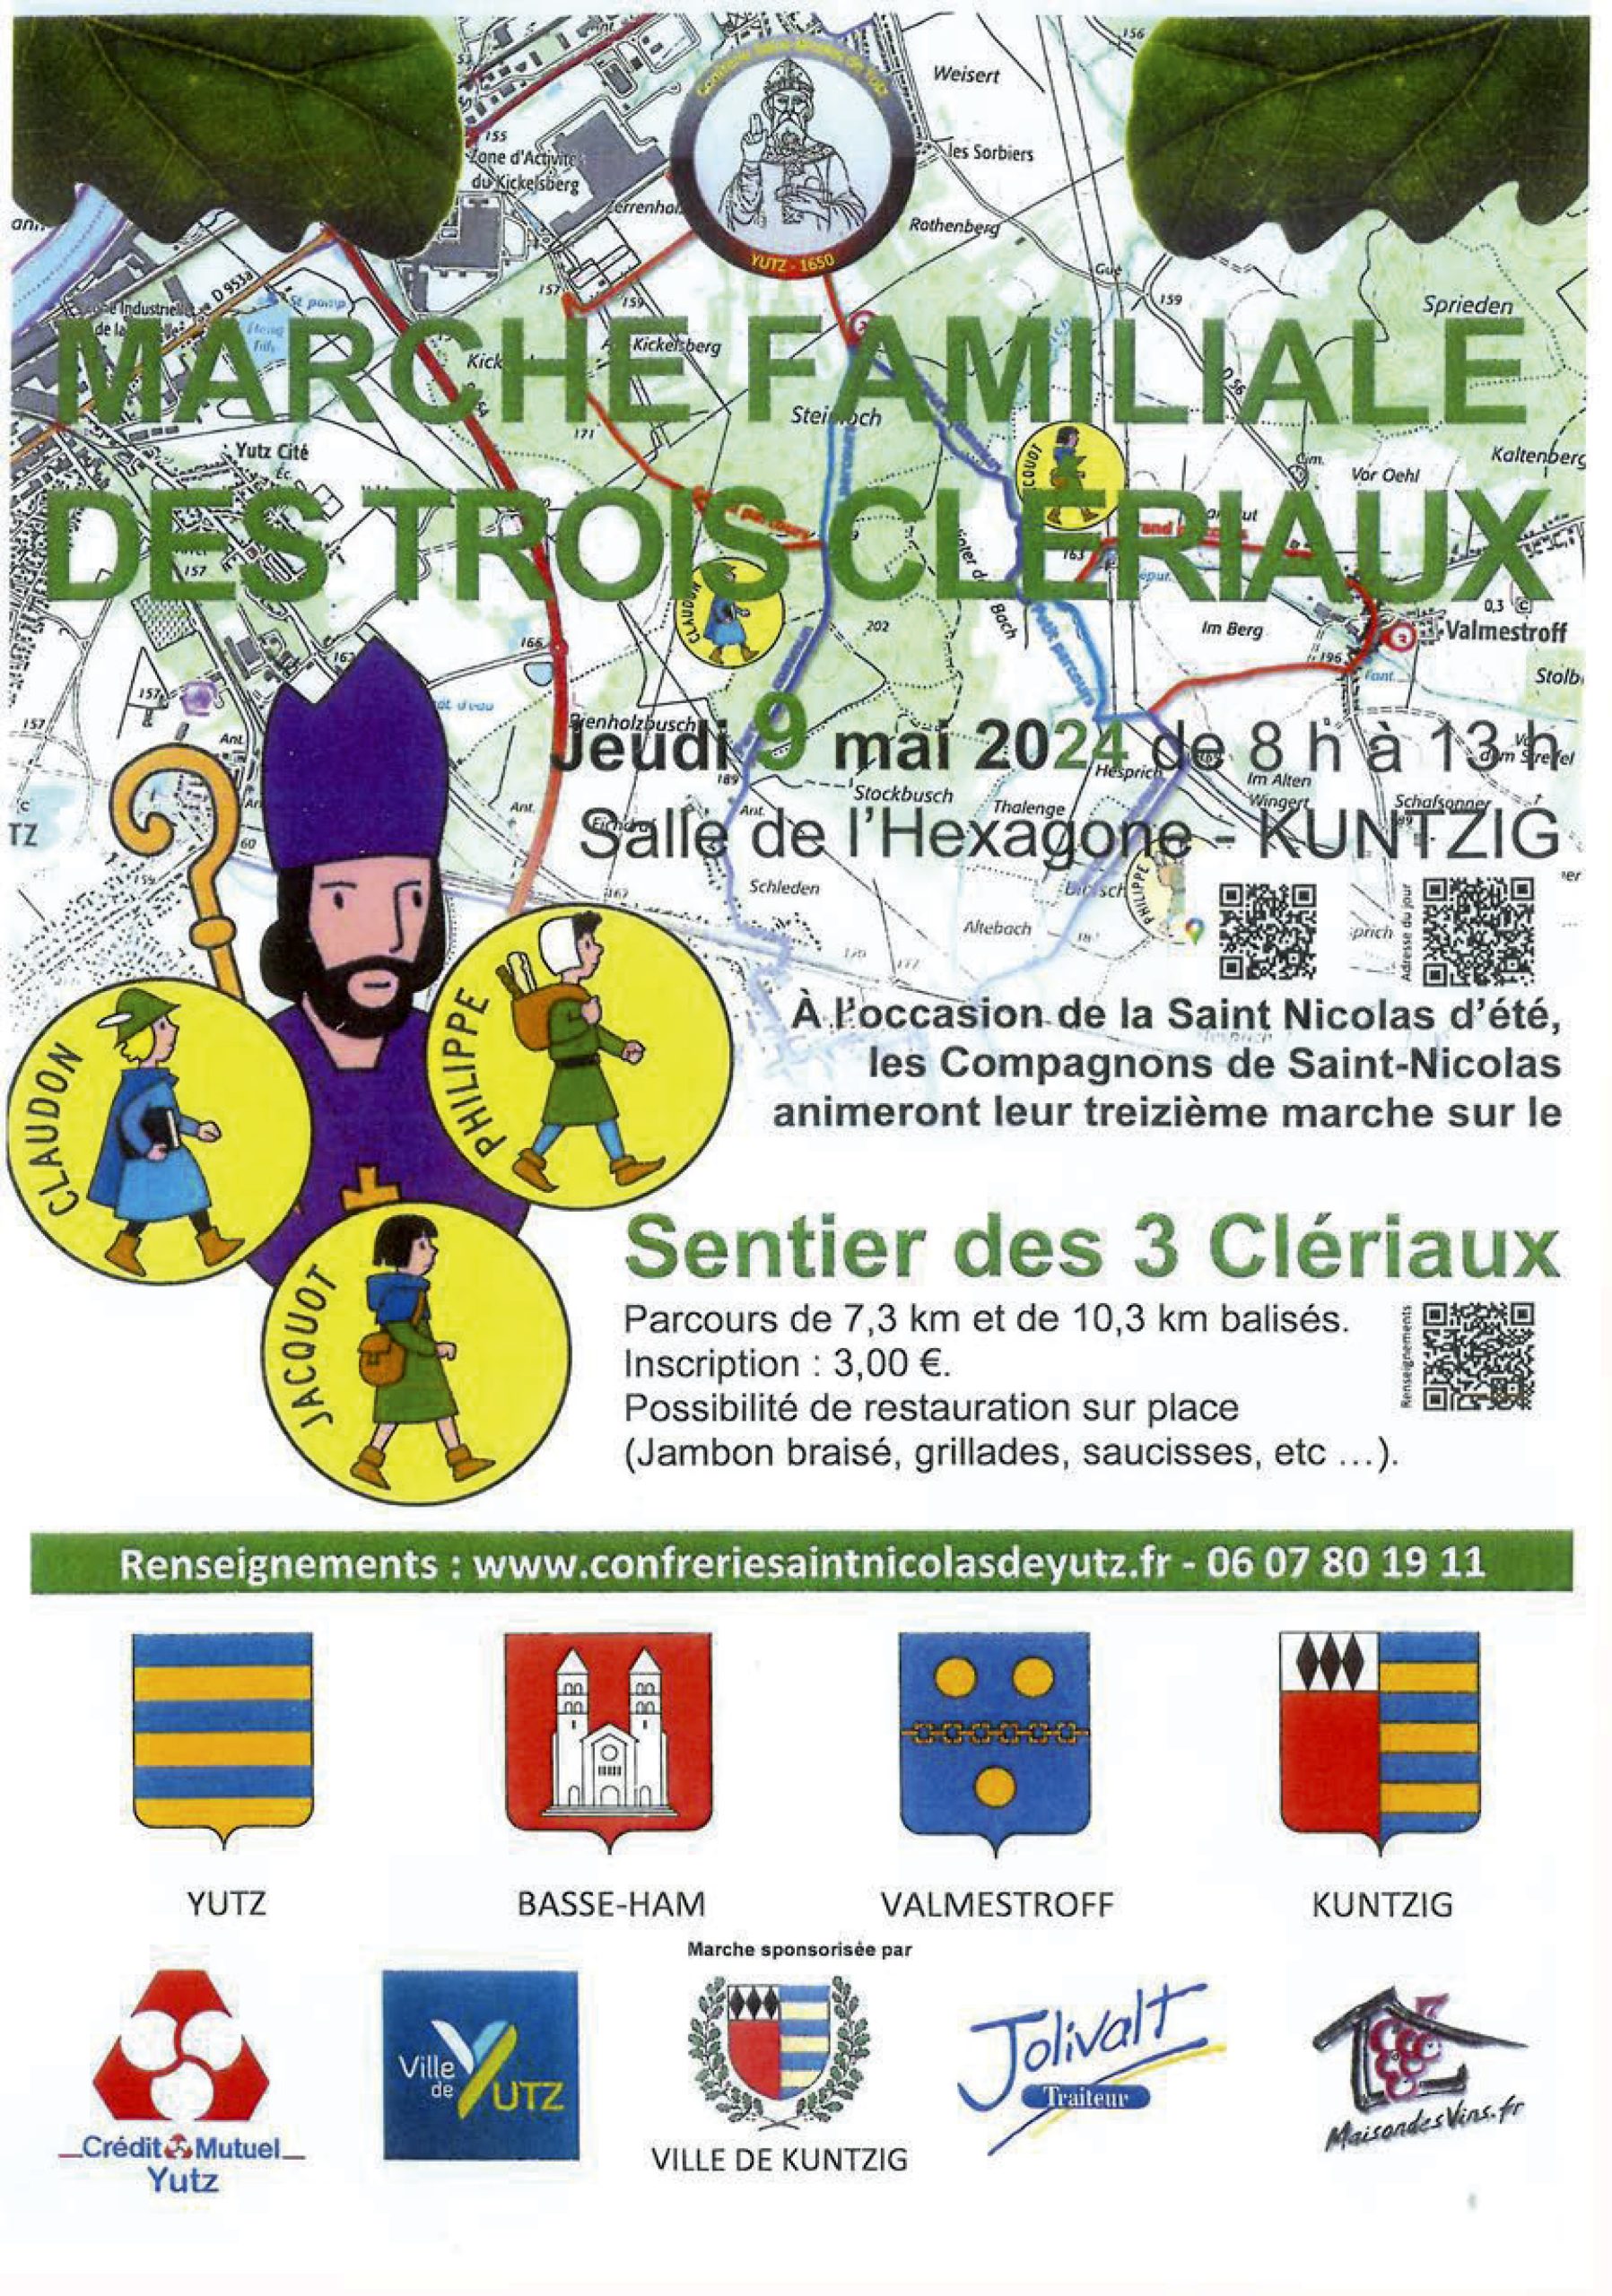 March of the 3 Clériaux